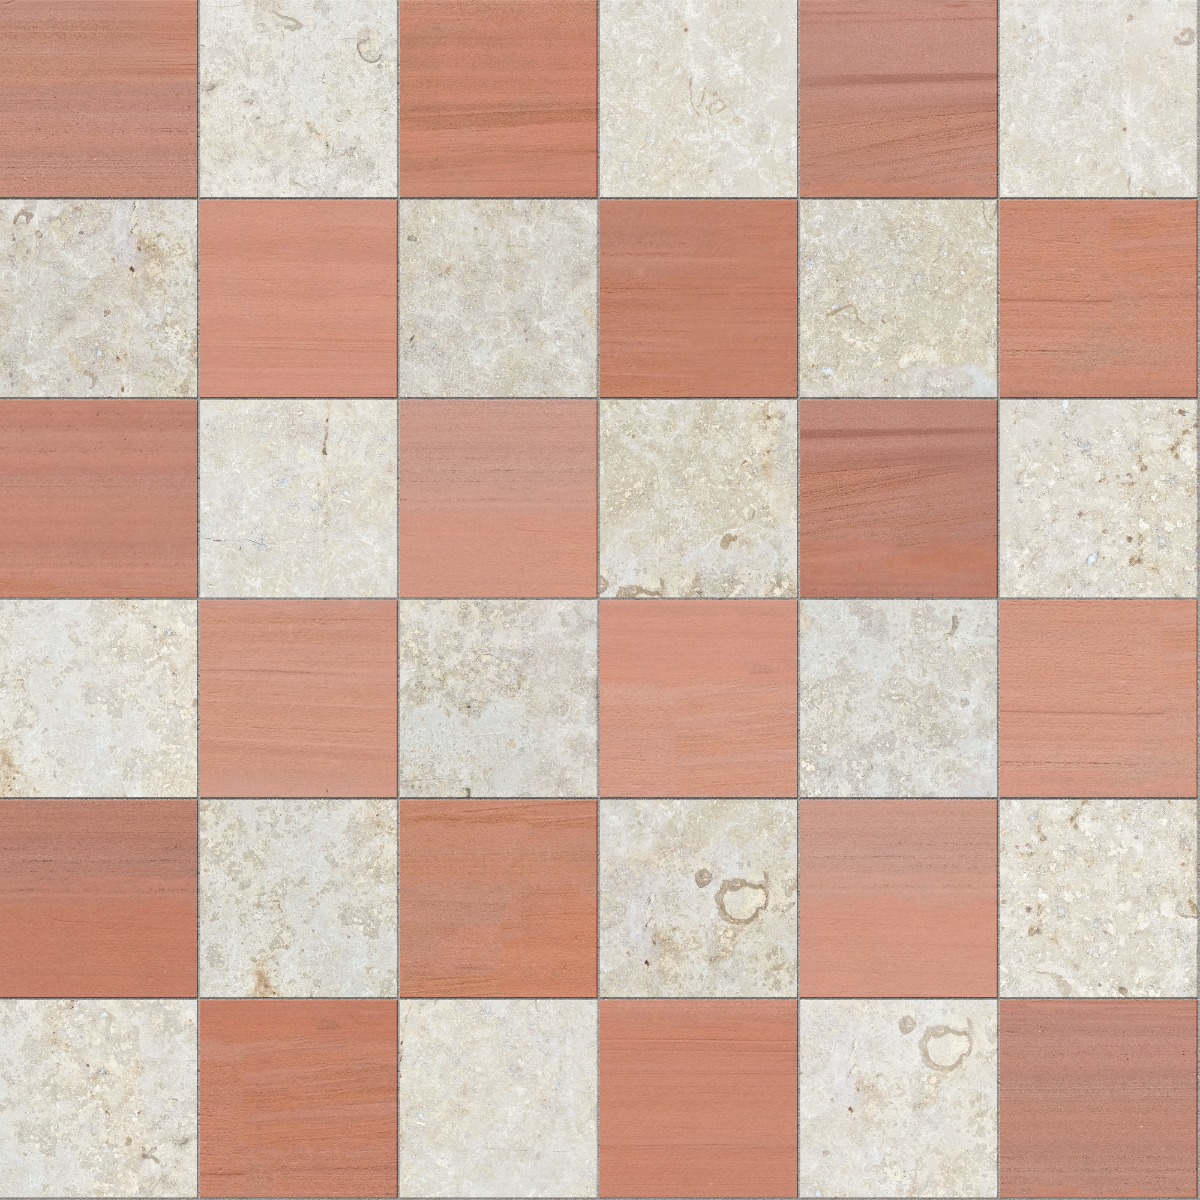 A seamless stone texture with red sandstone blocks arranged in a Stack pattern